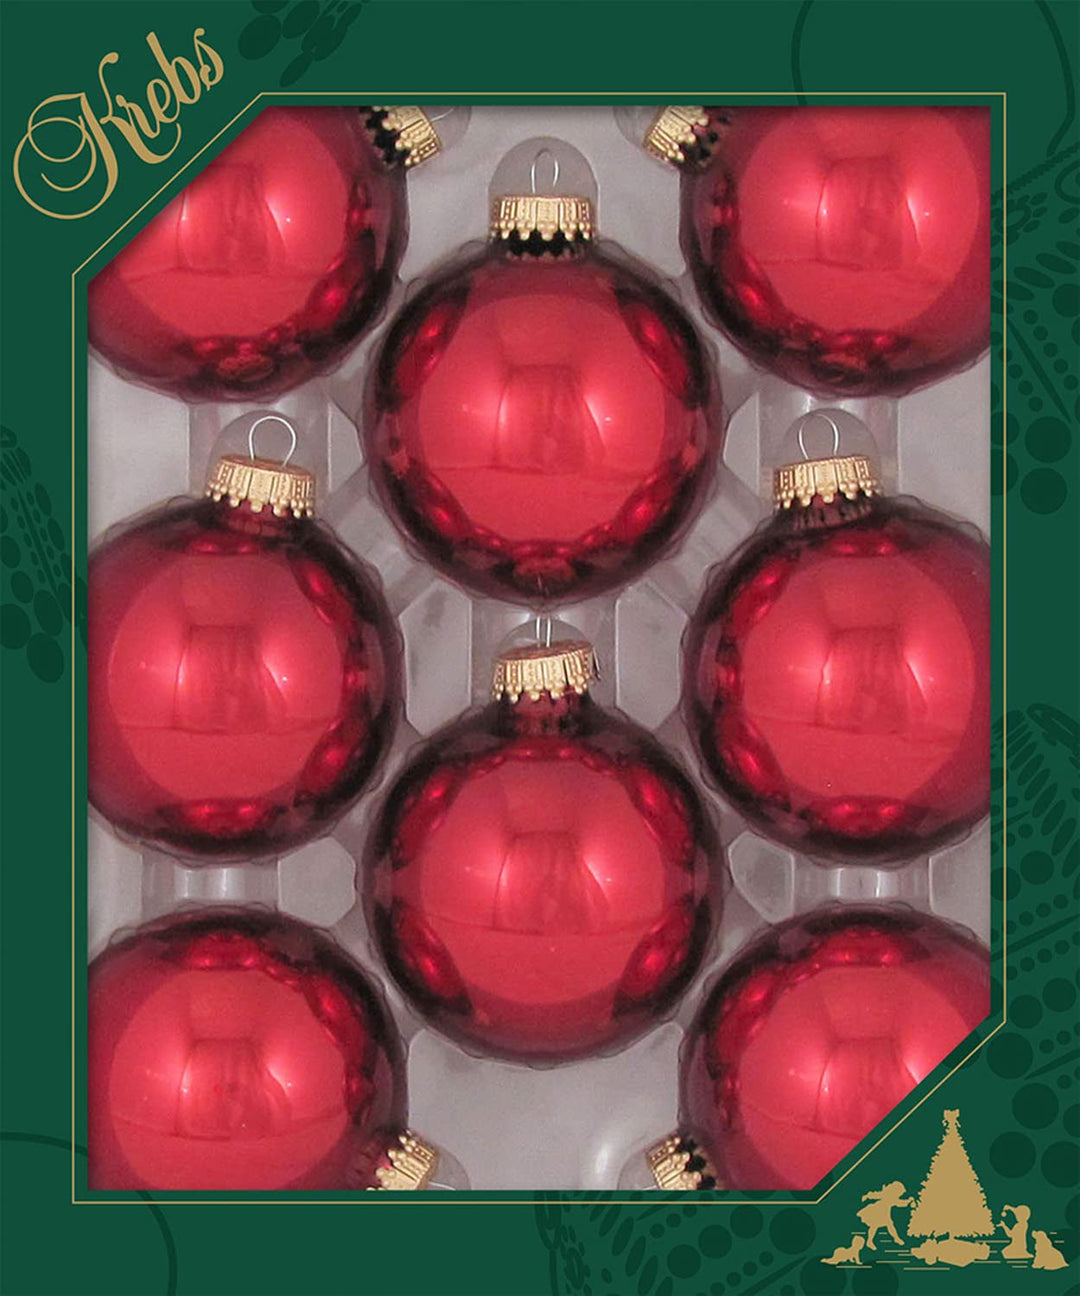 Christmas Tree Ornaments - 67mm / 2.625" [8 Pieces] Designer Glass Baubles from Christmas By Krebs - Handcrafted Seamless Hanging Holiday Decor for Trees (Shiny December Red)